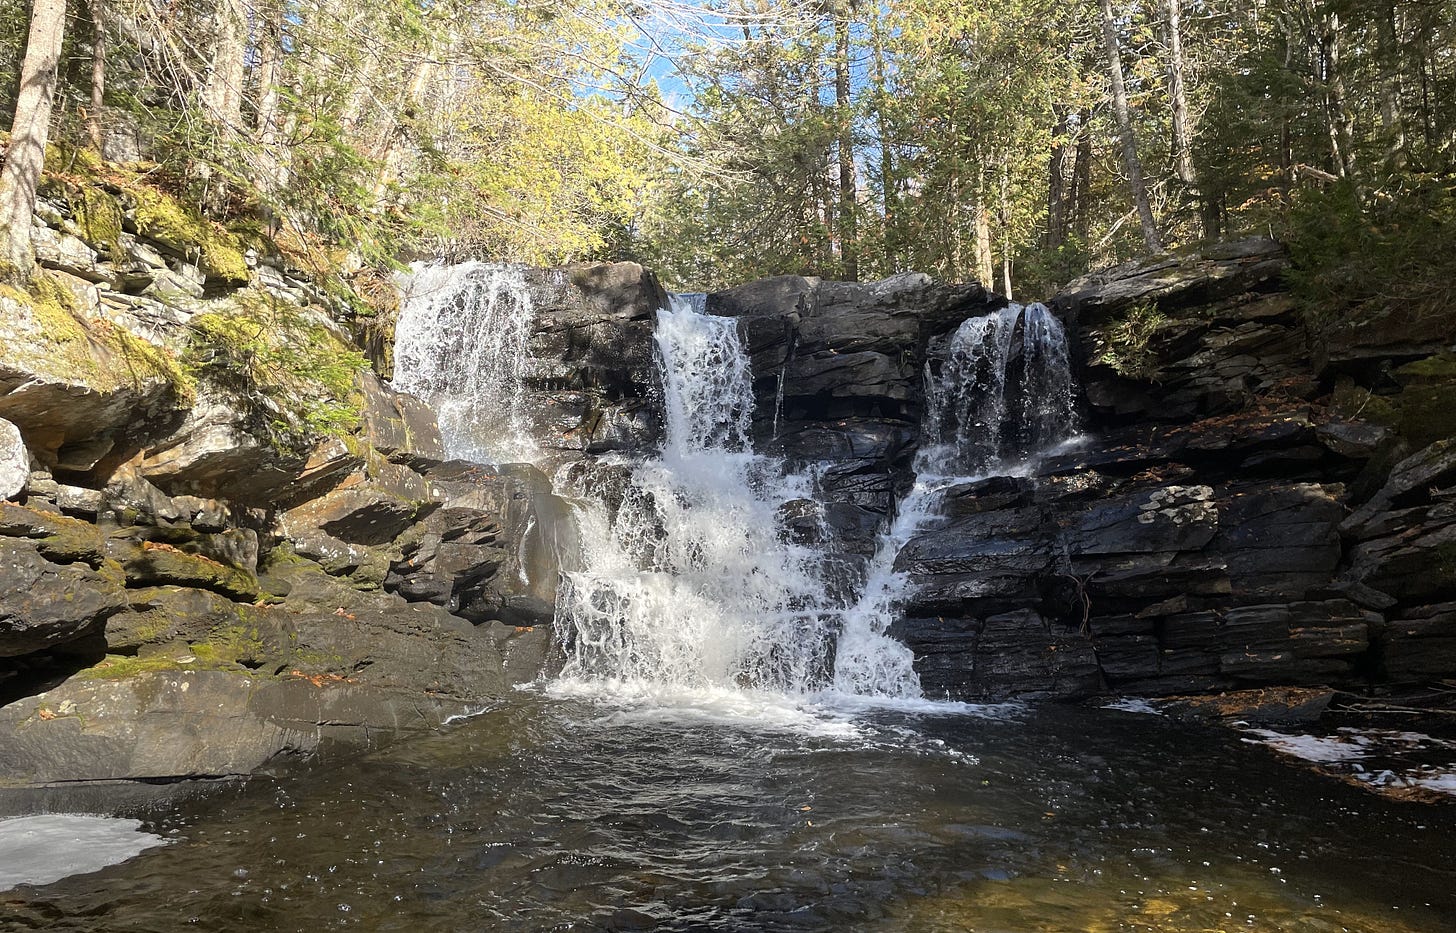 a three-part waterfall cascading through layered rock with sparse fall trees above